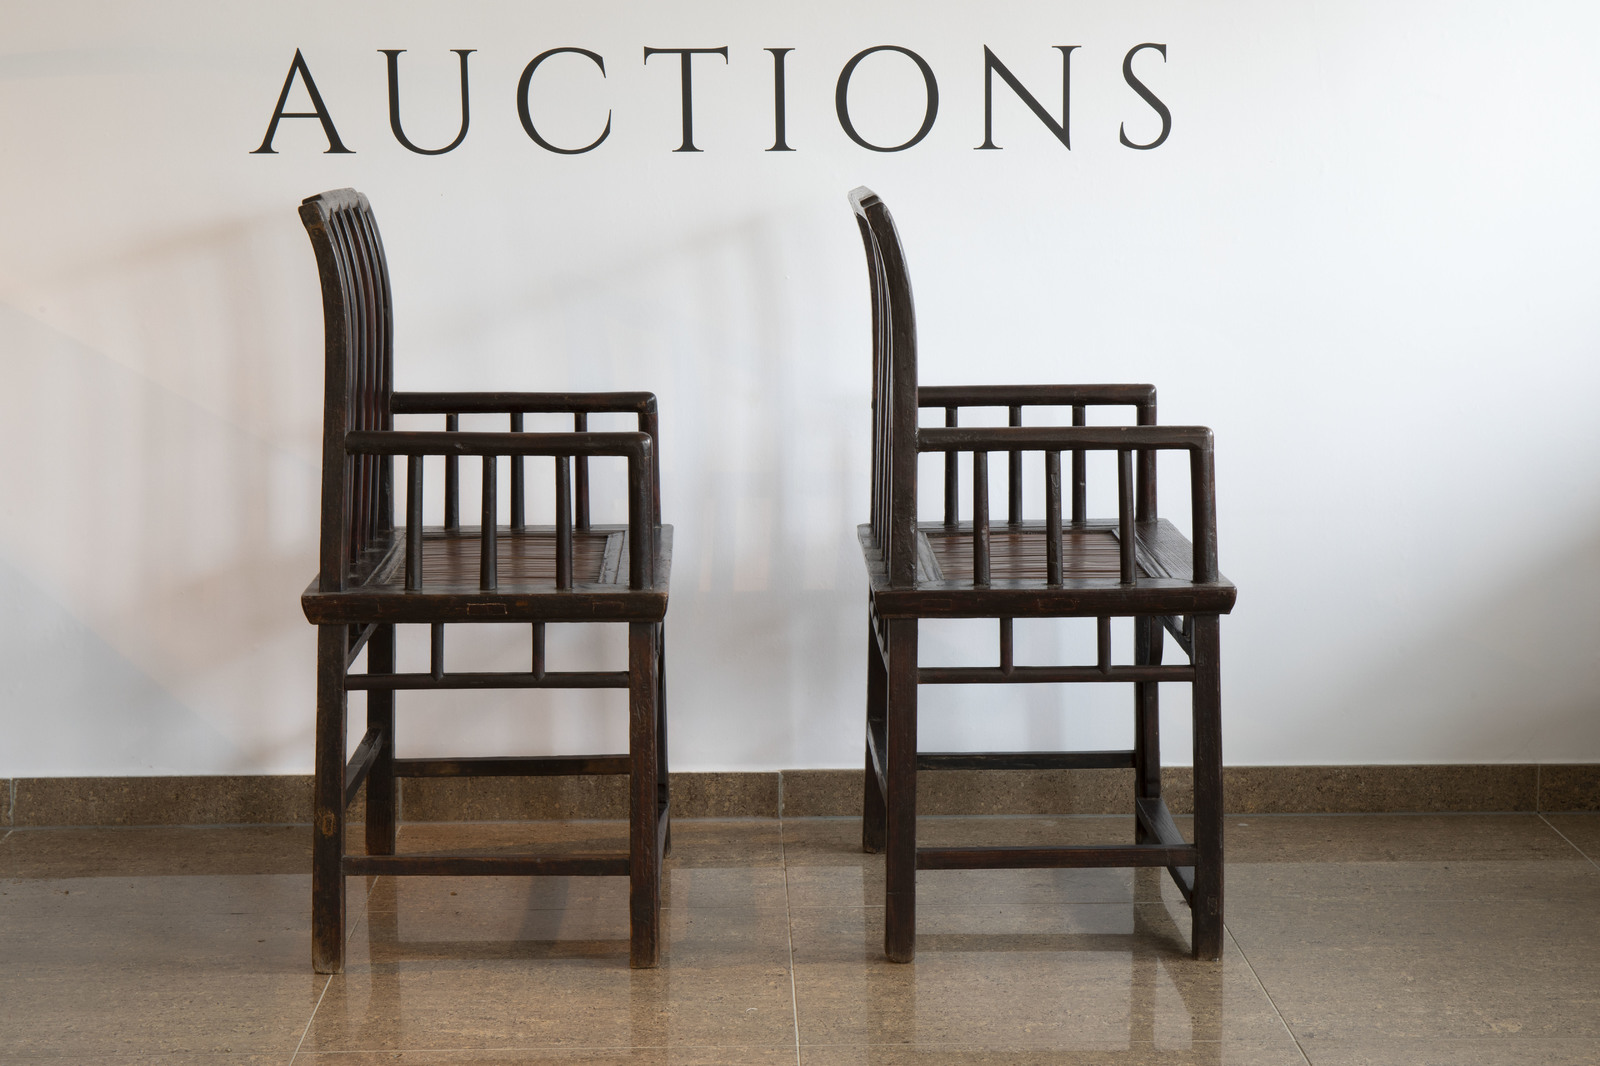 A pair of Chinese lacquered wooden chairs, first half of the 20th C. - Image 3 of 7